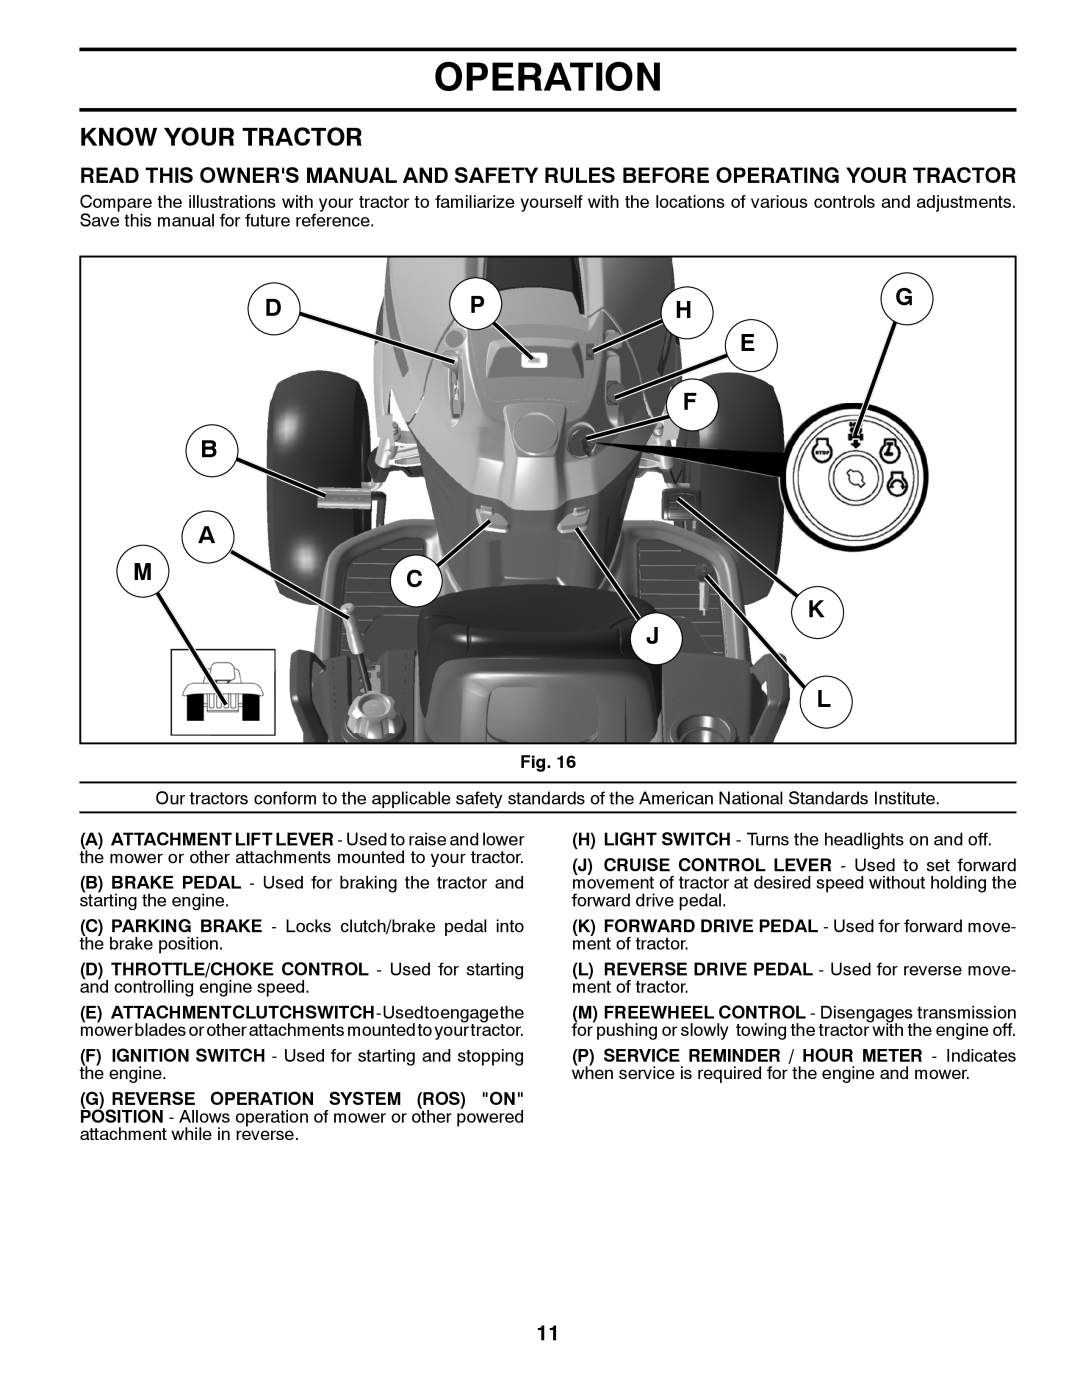 Husqvarna YTH26V54 owner manual Operation, Know Your Tractor, Dph F B, A M C 